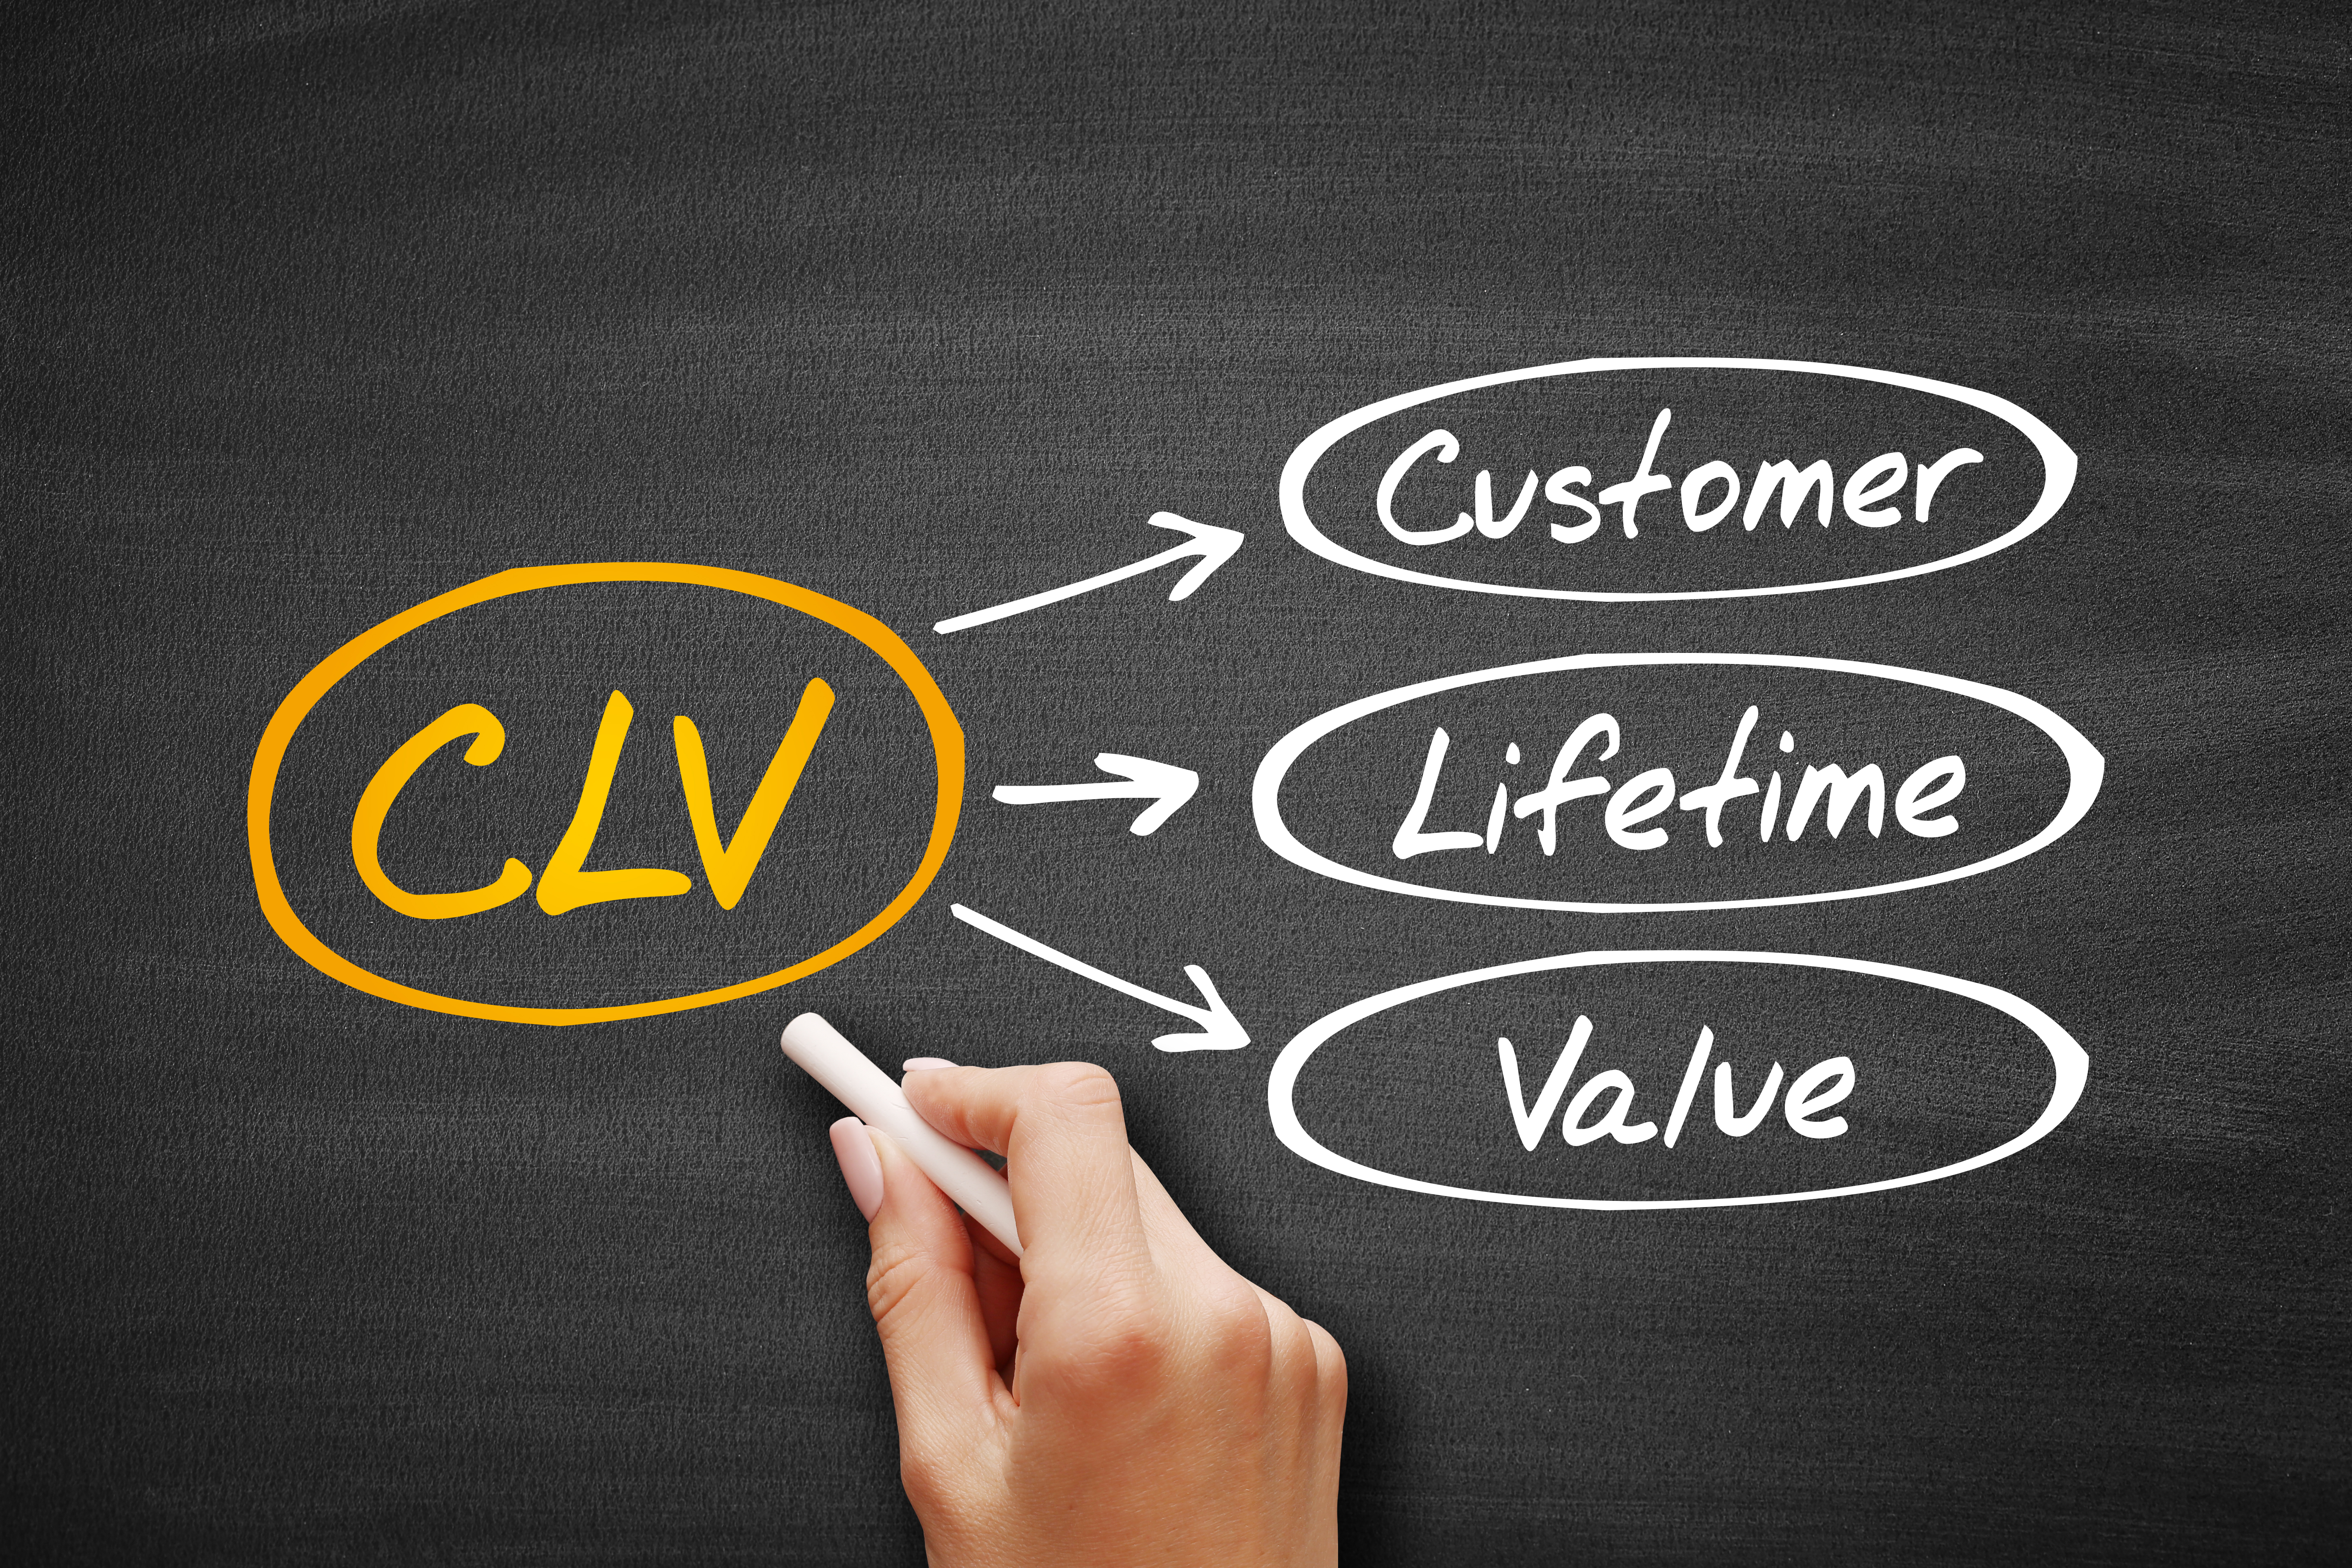 How to Calculate SaaS Customer Lifetime Value (LTV)